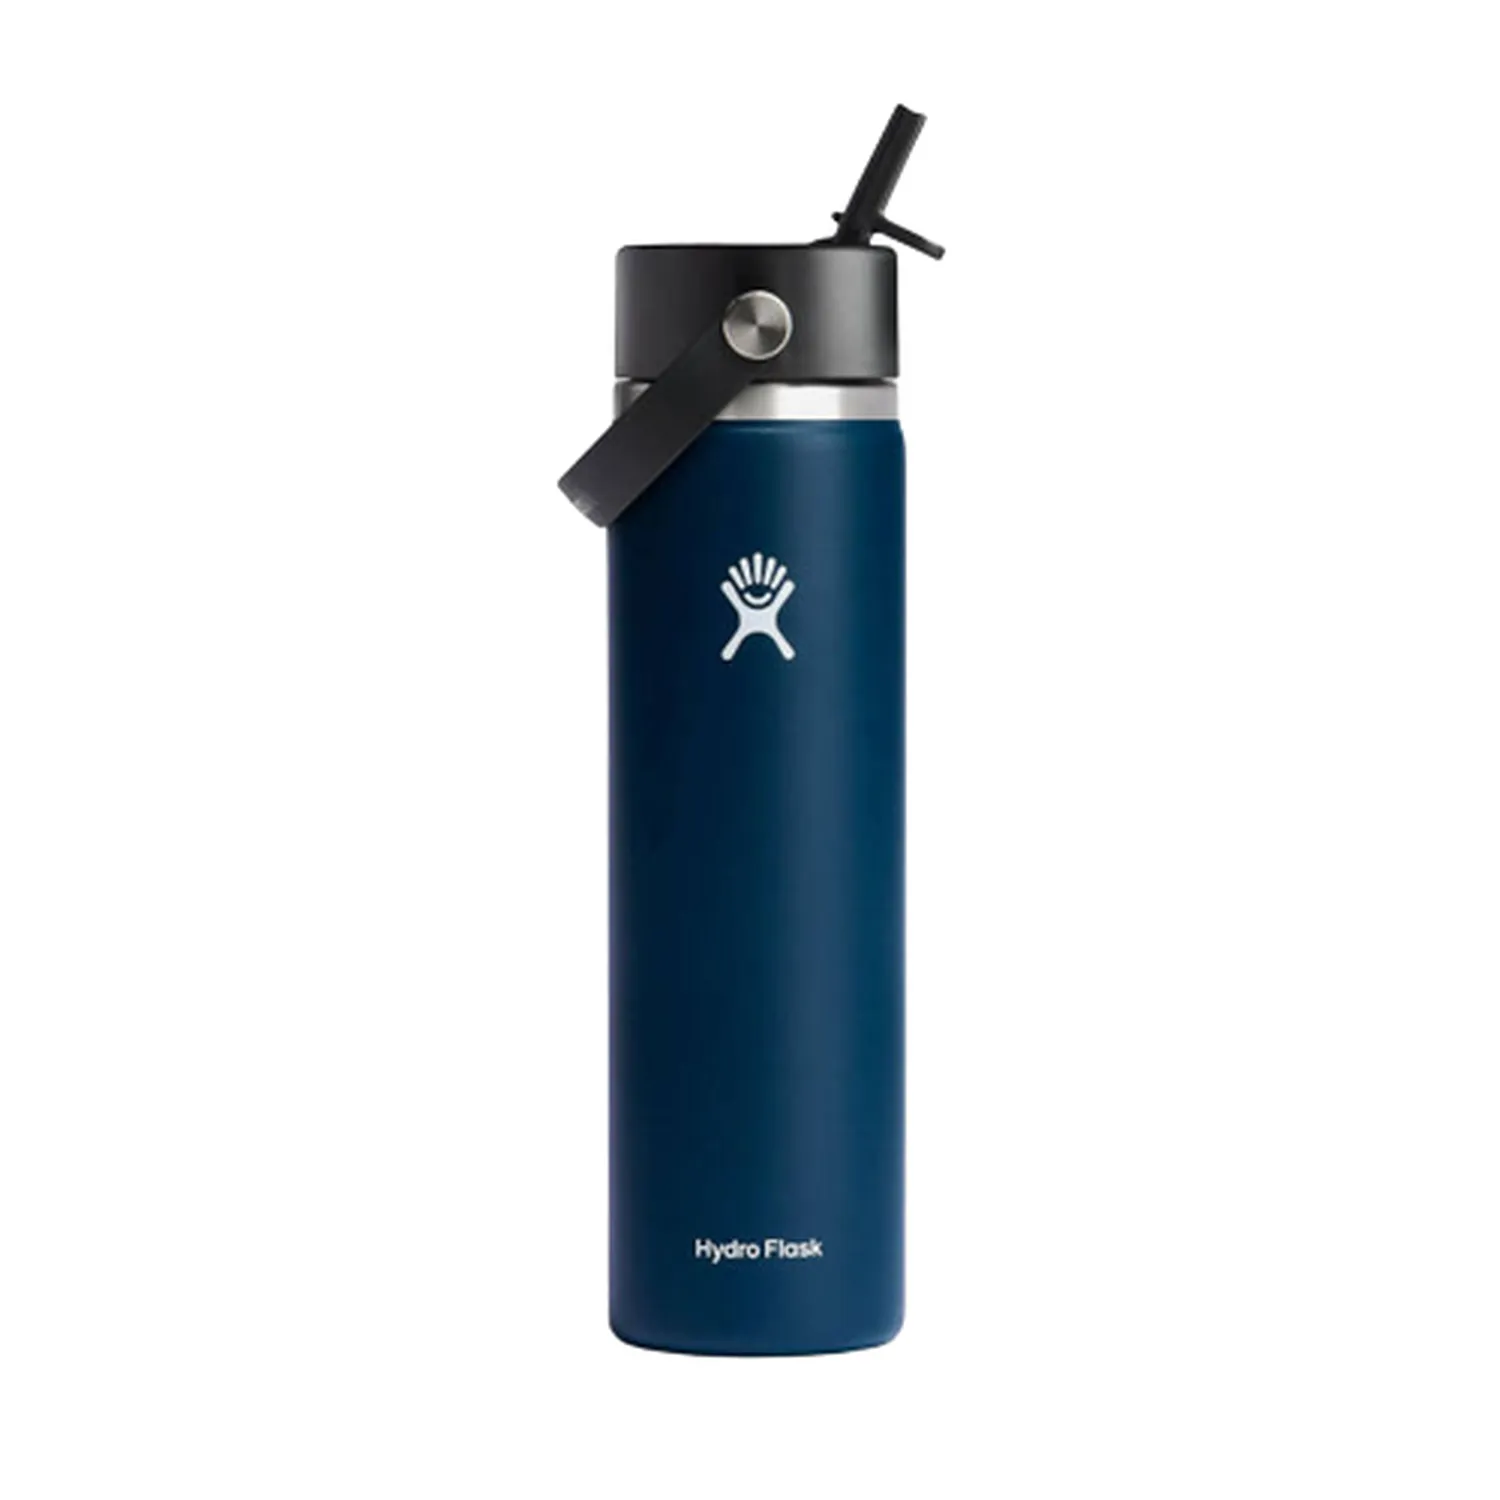 002_ger_pl_Hydro-Flask-24-oz-Wide-Mouth-with-Flex-Straw-Cap-W24BFS464-1056084_1-removebg-preview.jpg